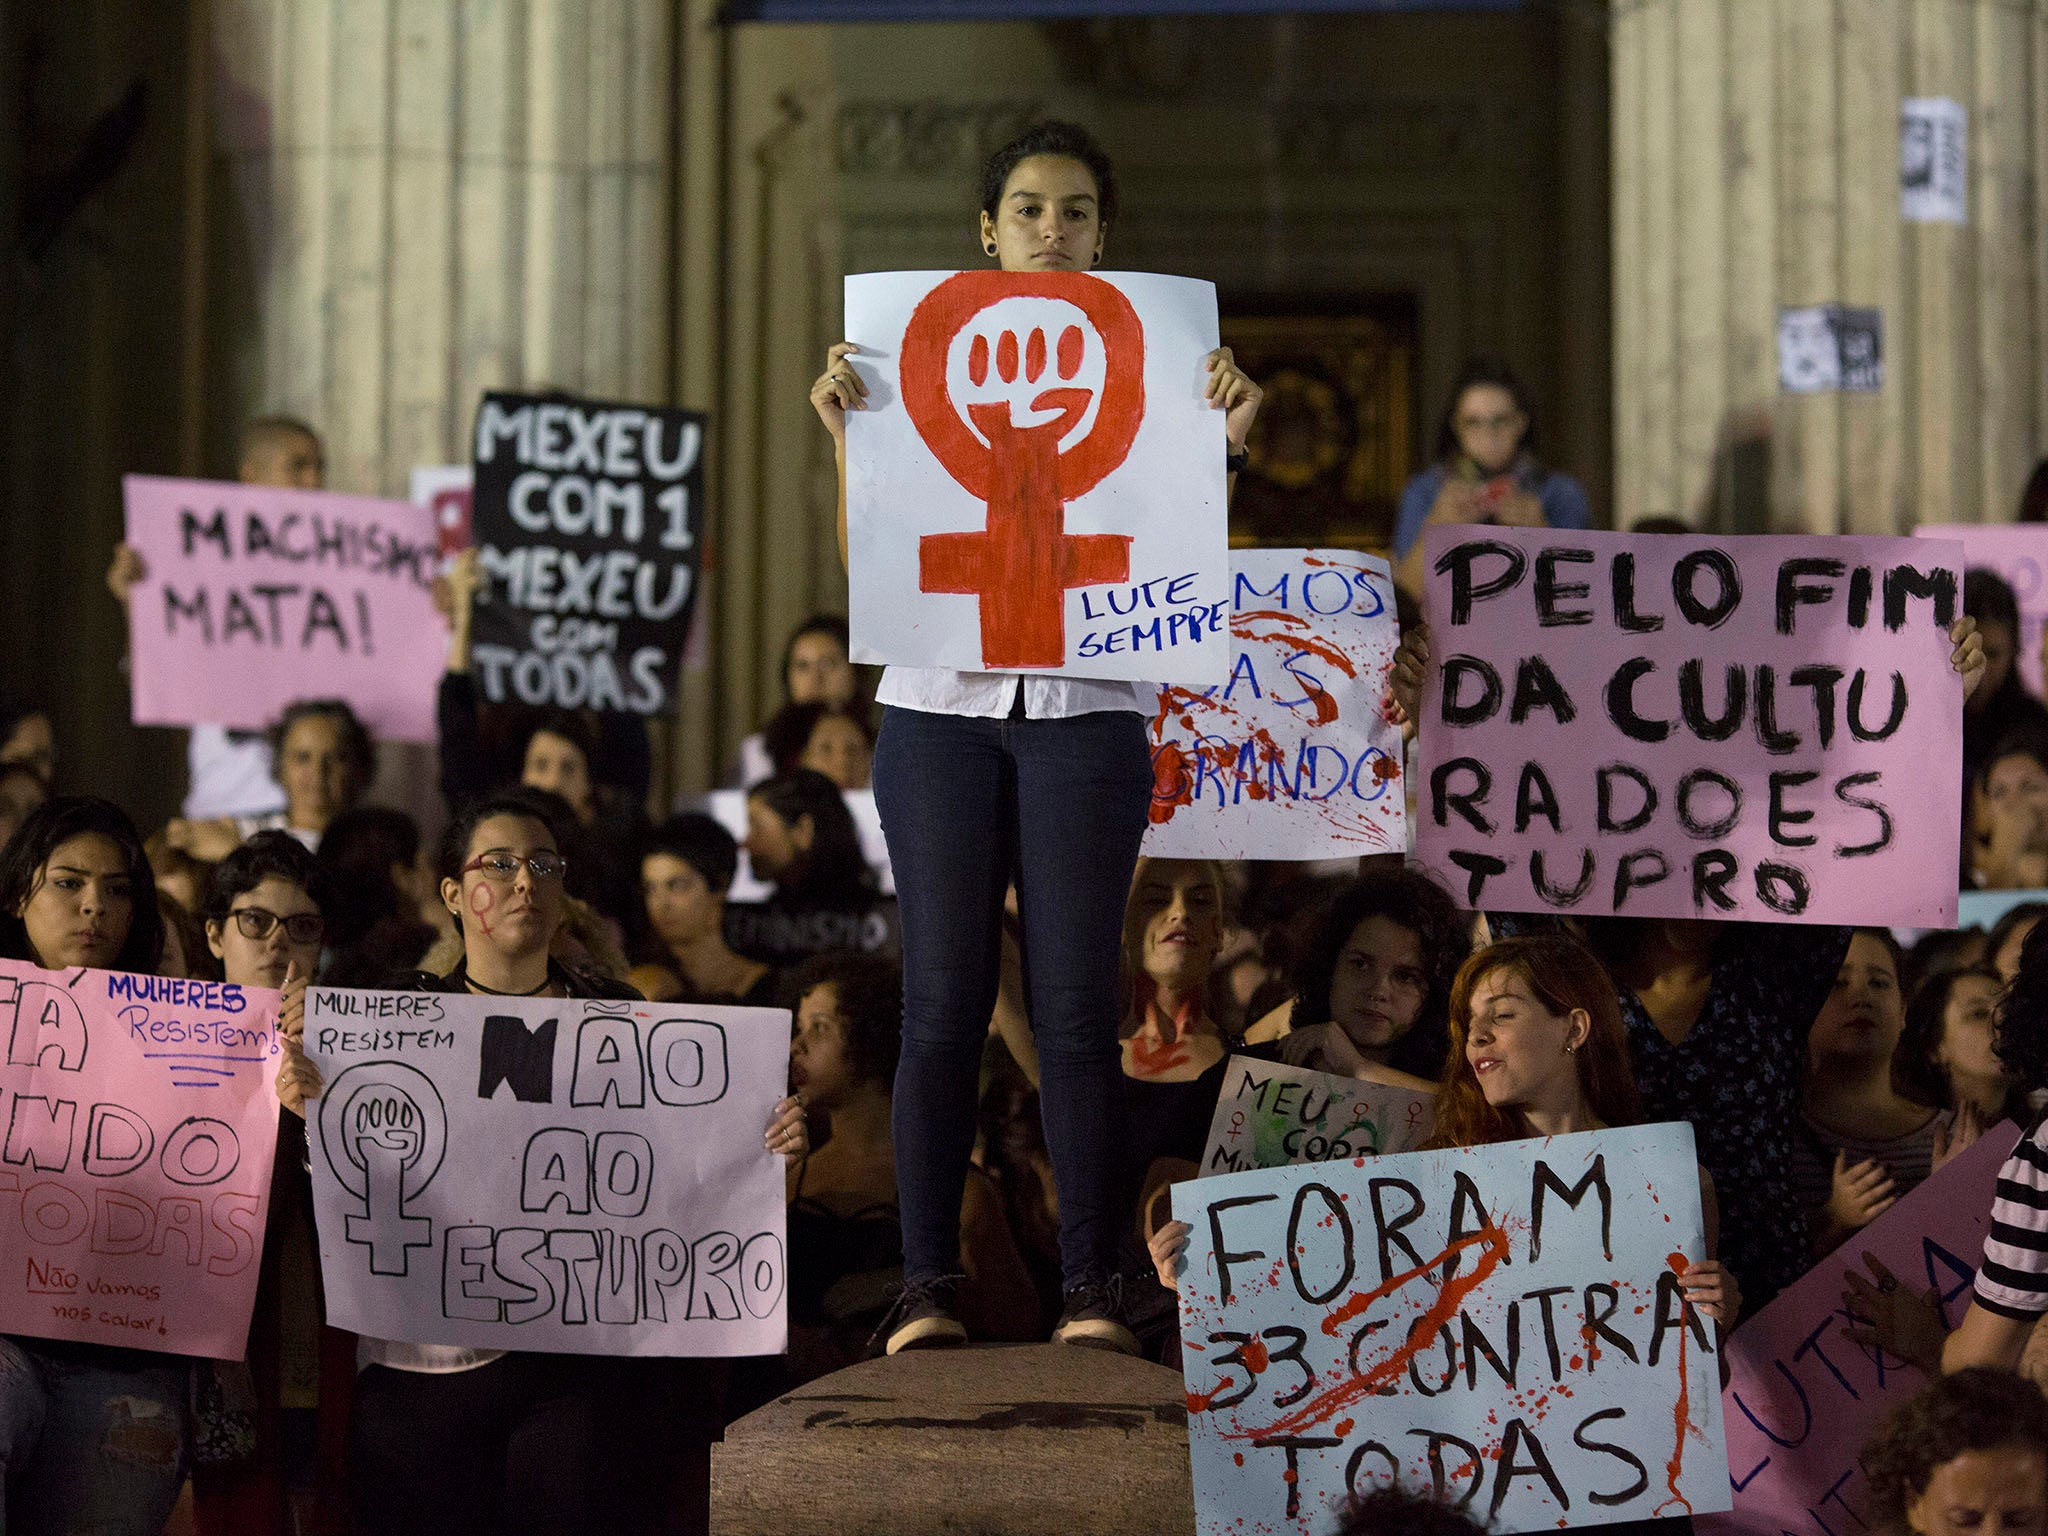 Protesters took to the streets all over the country demanding an end to sexual violence